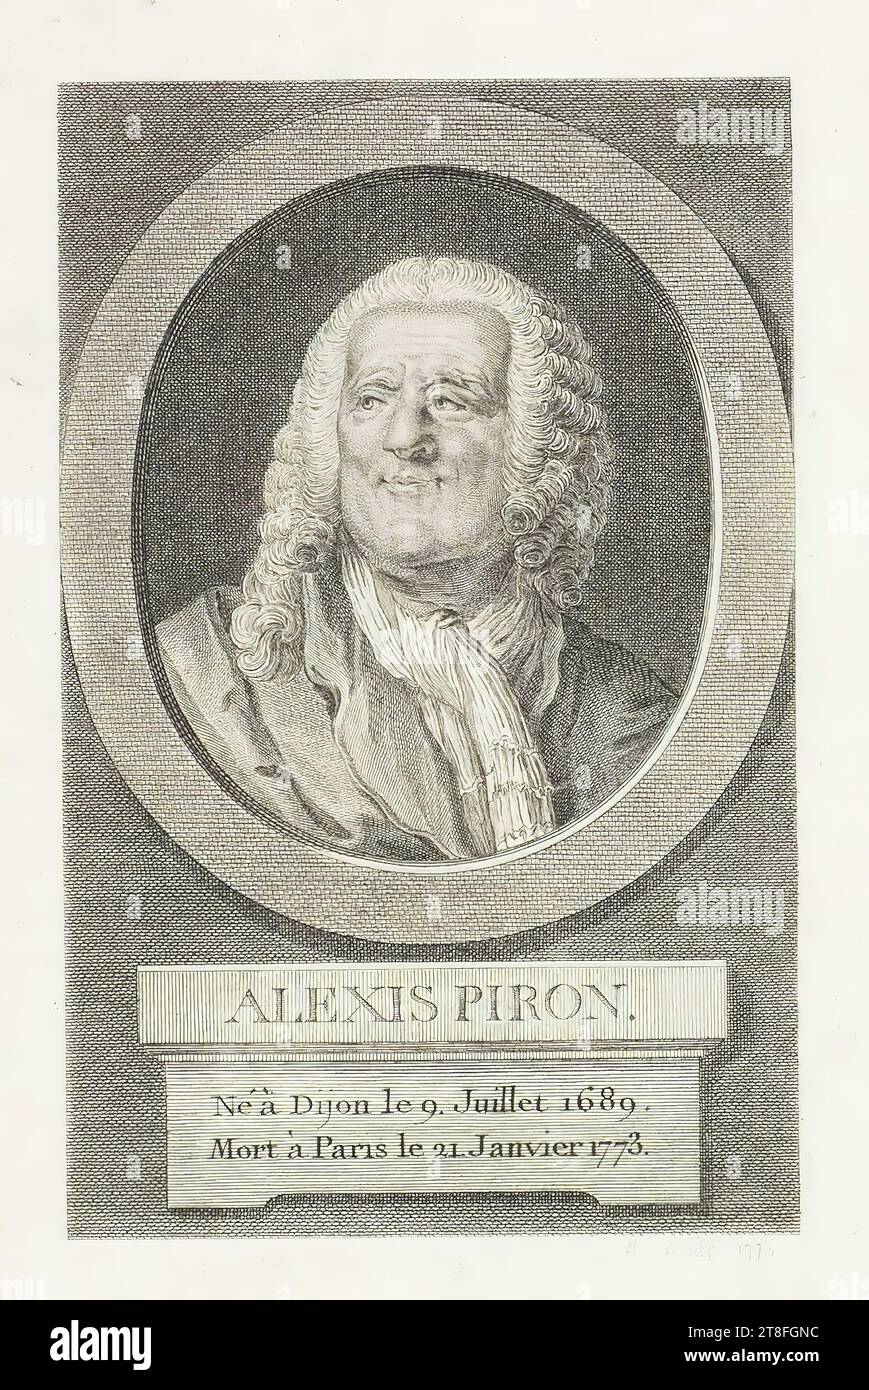 ALEXIS PIRON., Born in Dijon on July 9, 1689., Died in Paris on January 21, 1773. E. Giraud 1776 Stock Photo